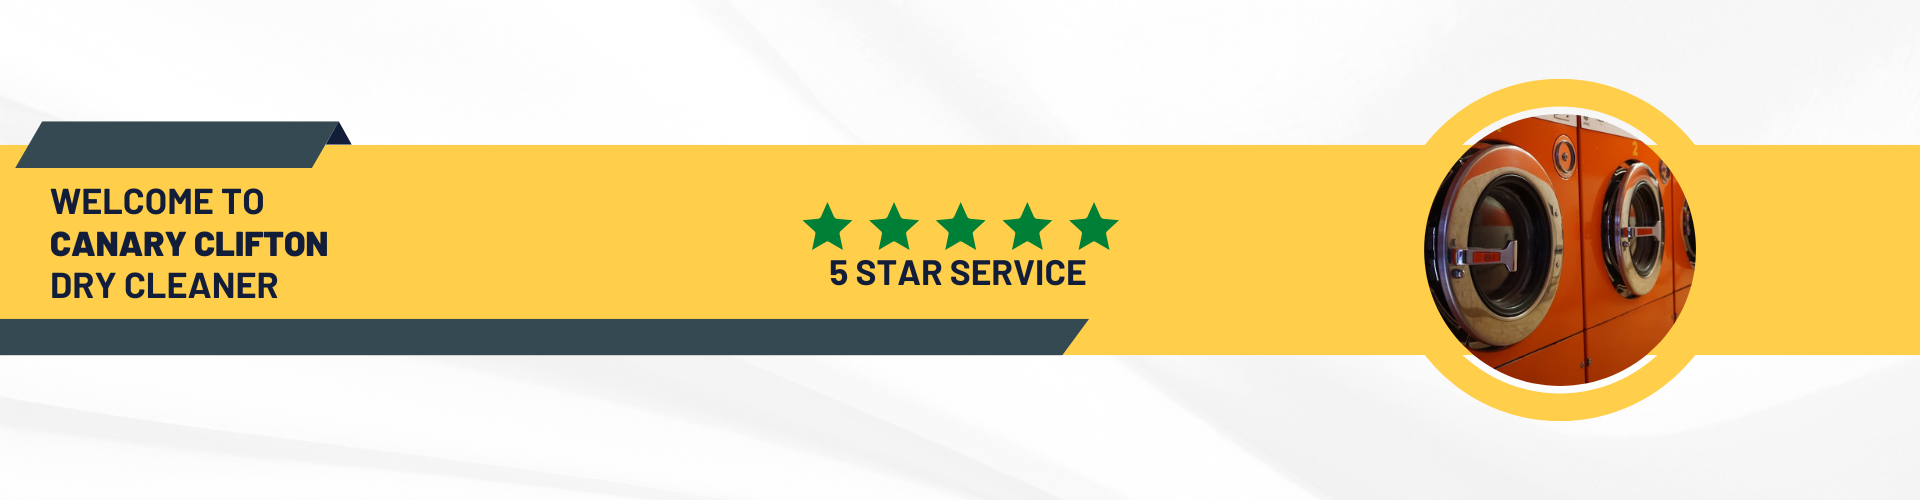 Canary Wharf Dry Cleaner 5 star rating